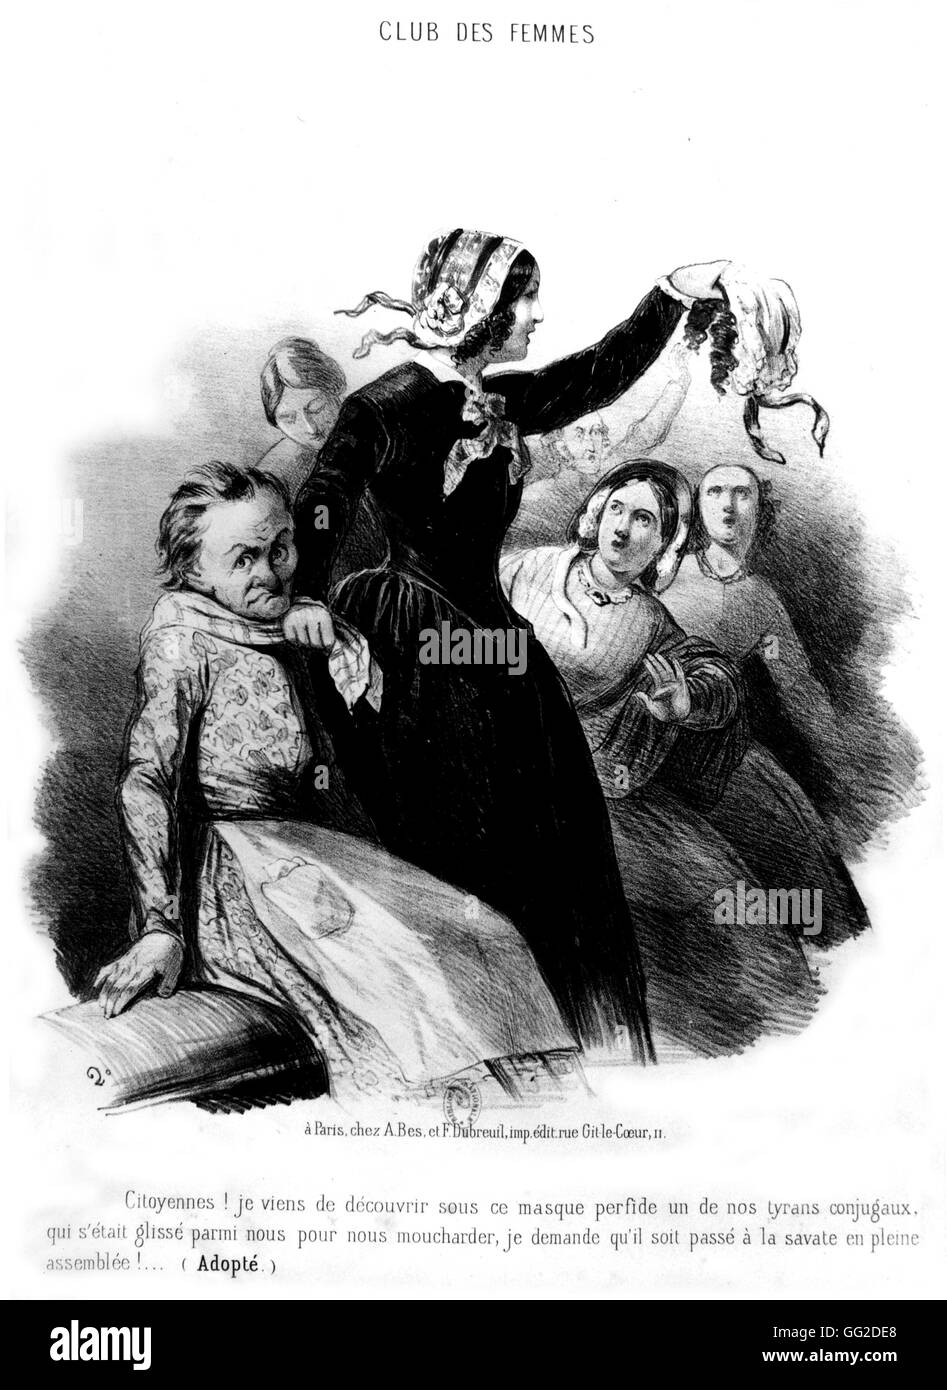 Women's club. 'Compatriots: I have just discovered a man...' February 1848 France Paris. National Library Stock Photo